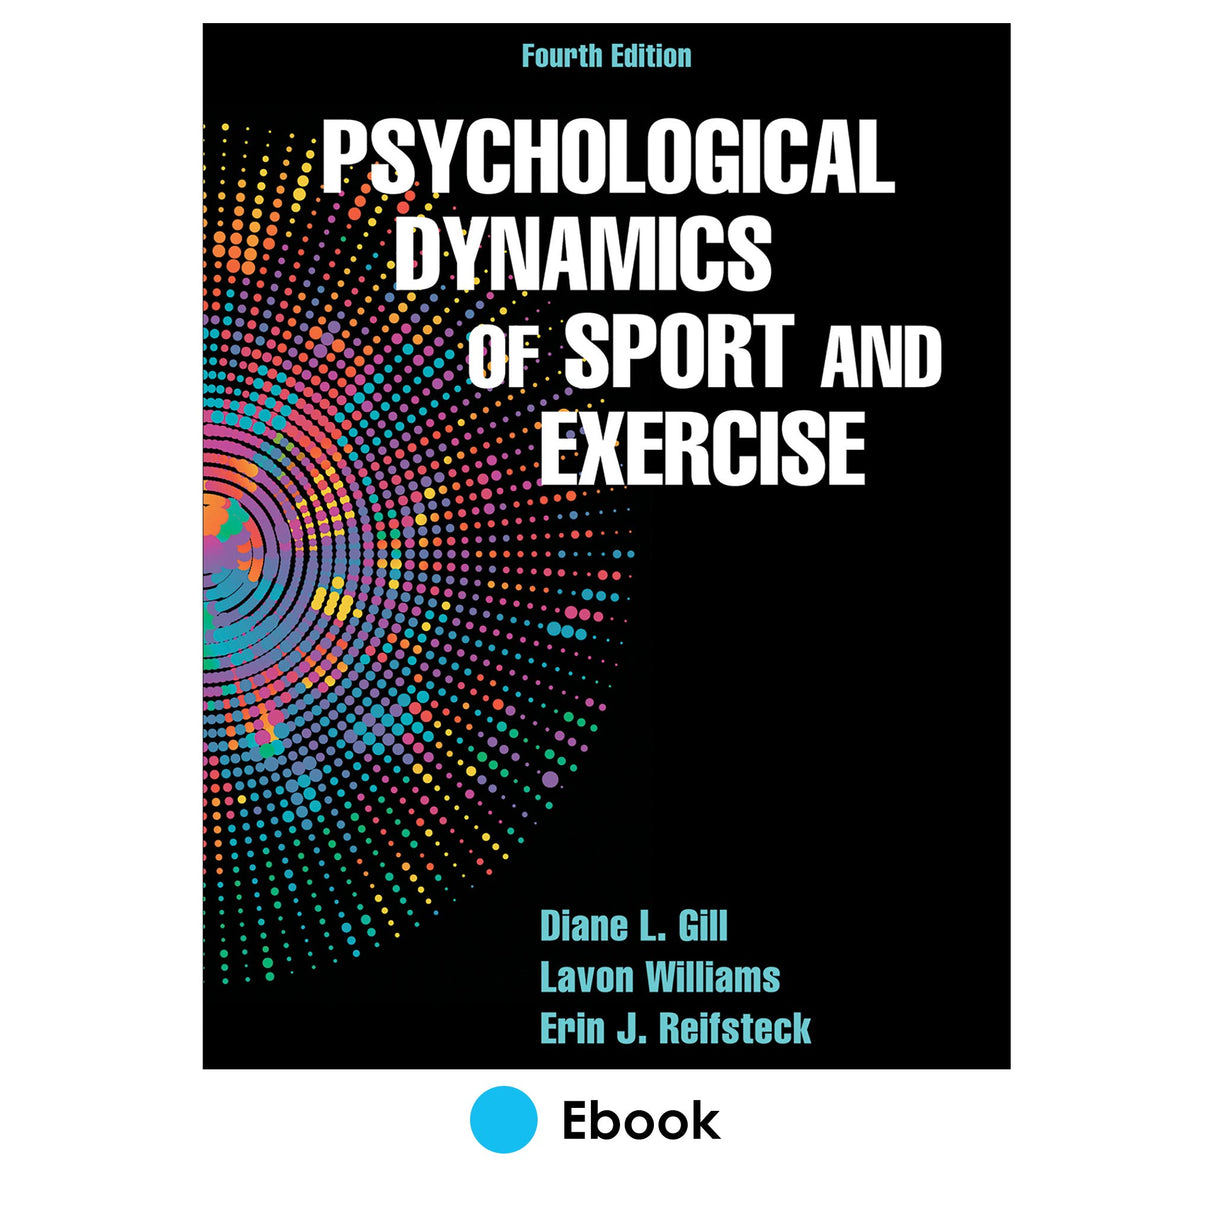 Psychological Dynamics of Sport and Exercise 4th Edition PDF